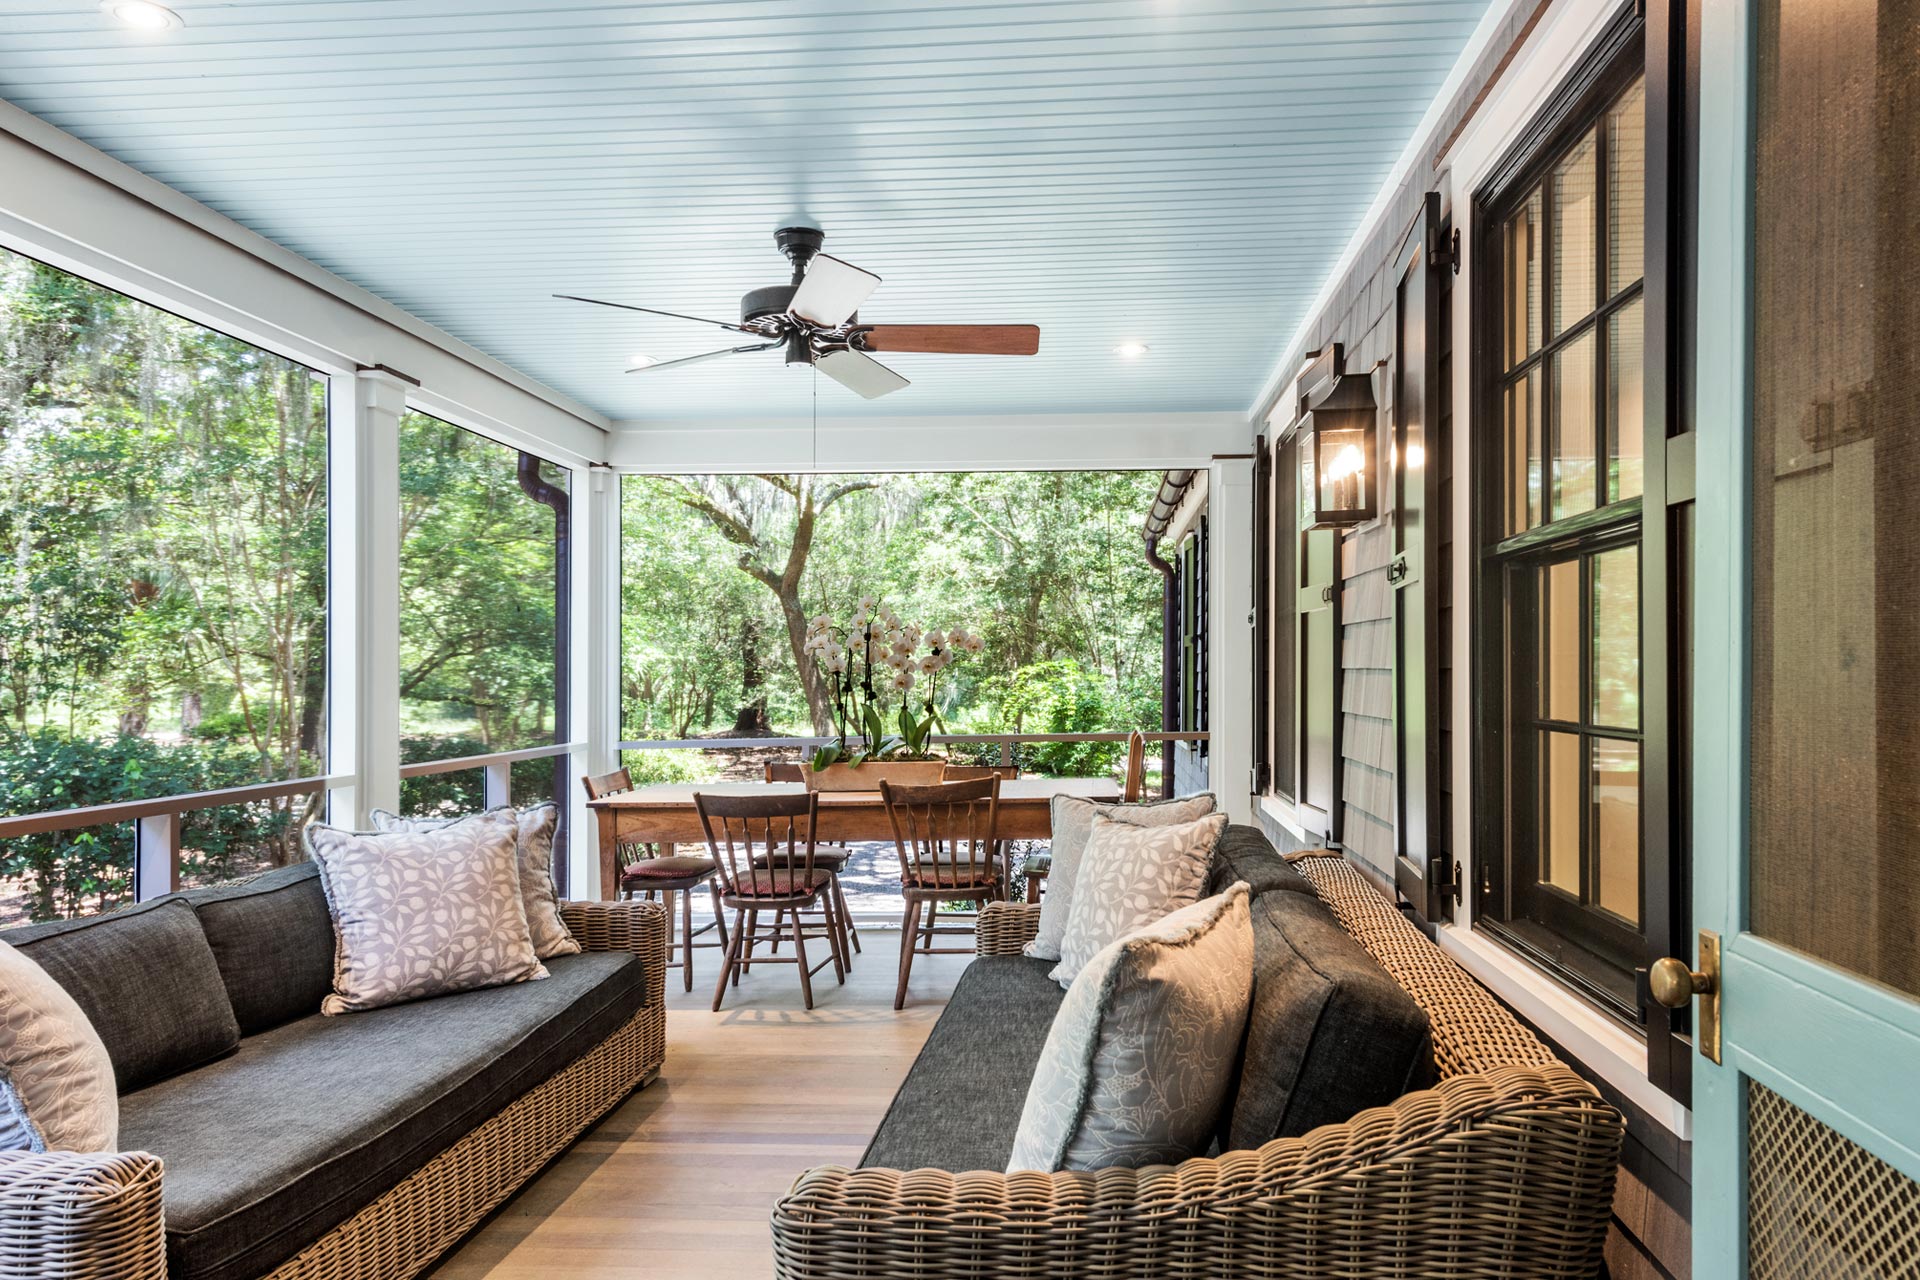 Screened in porch addition for living and dining space